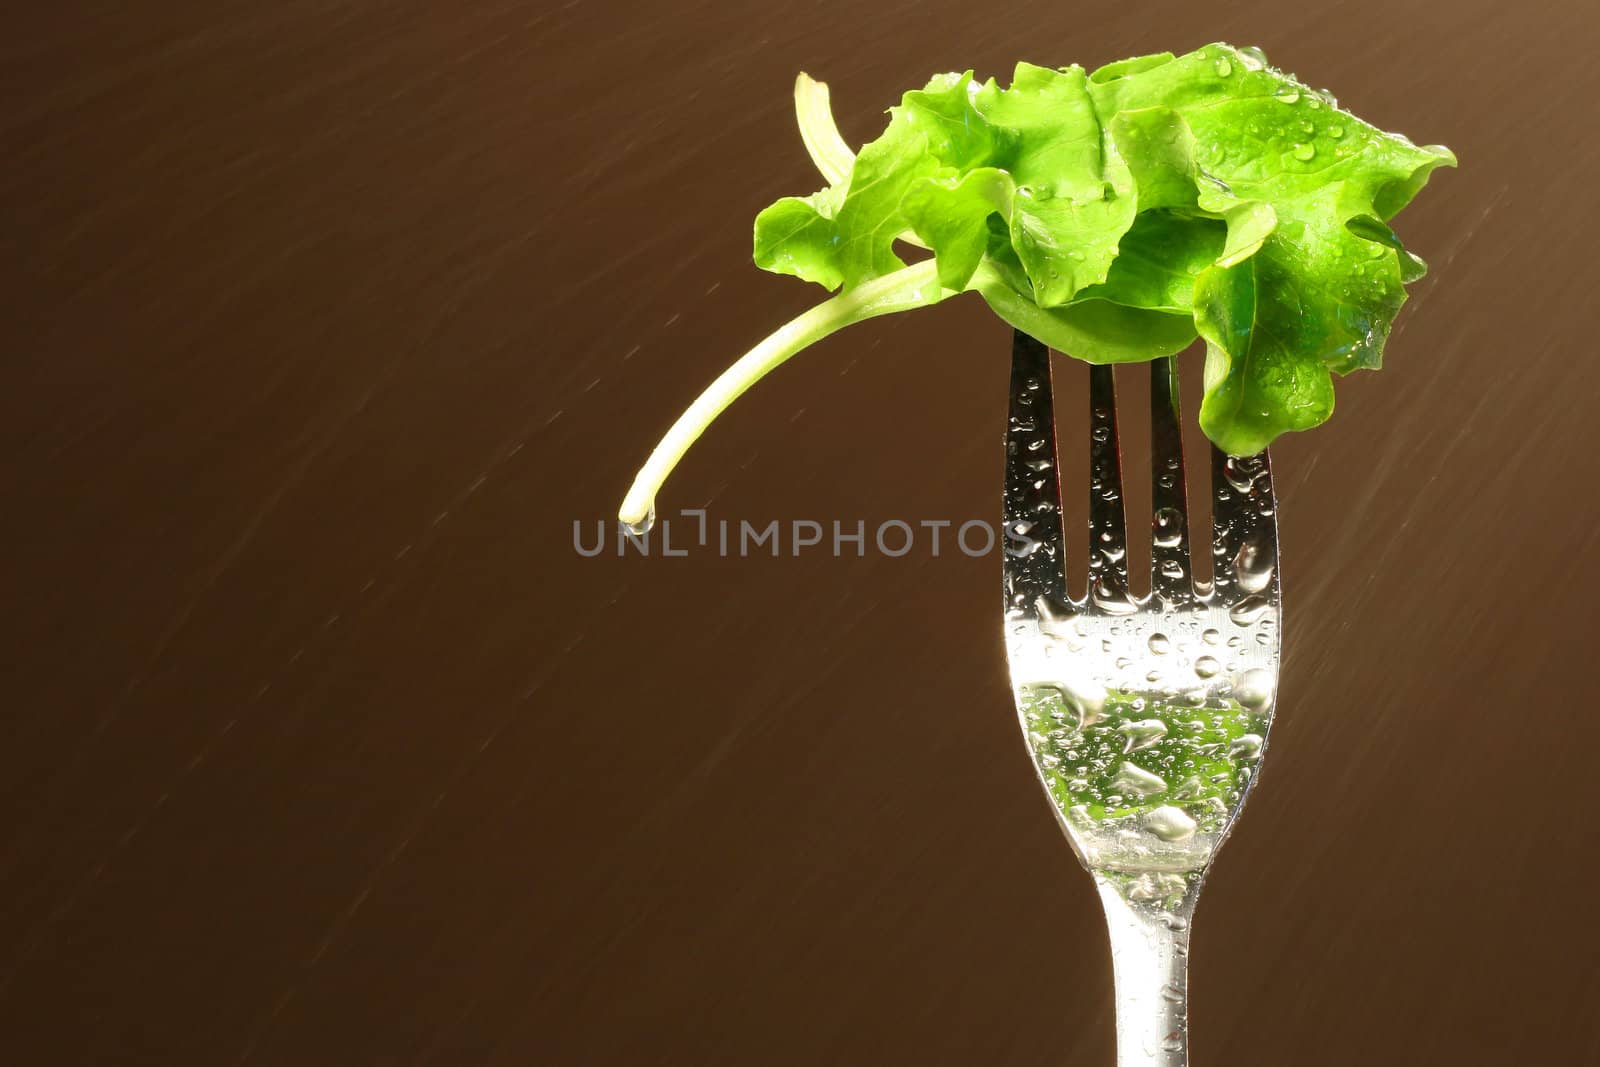 Leaf of lettuce on a fork with water spray in background